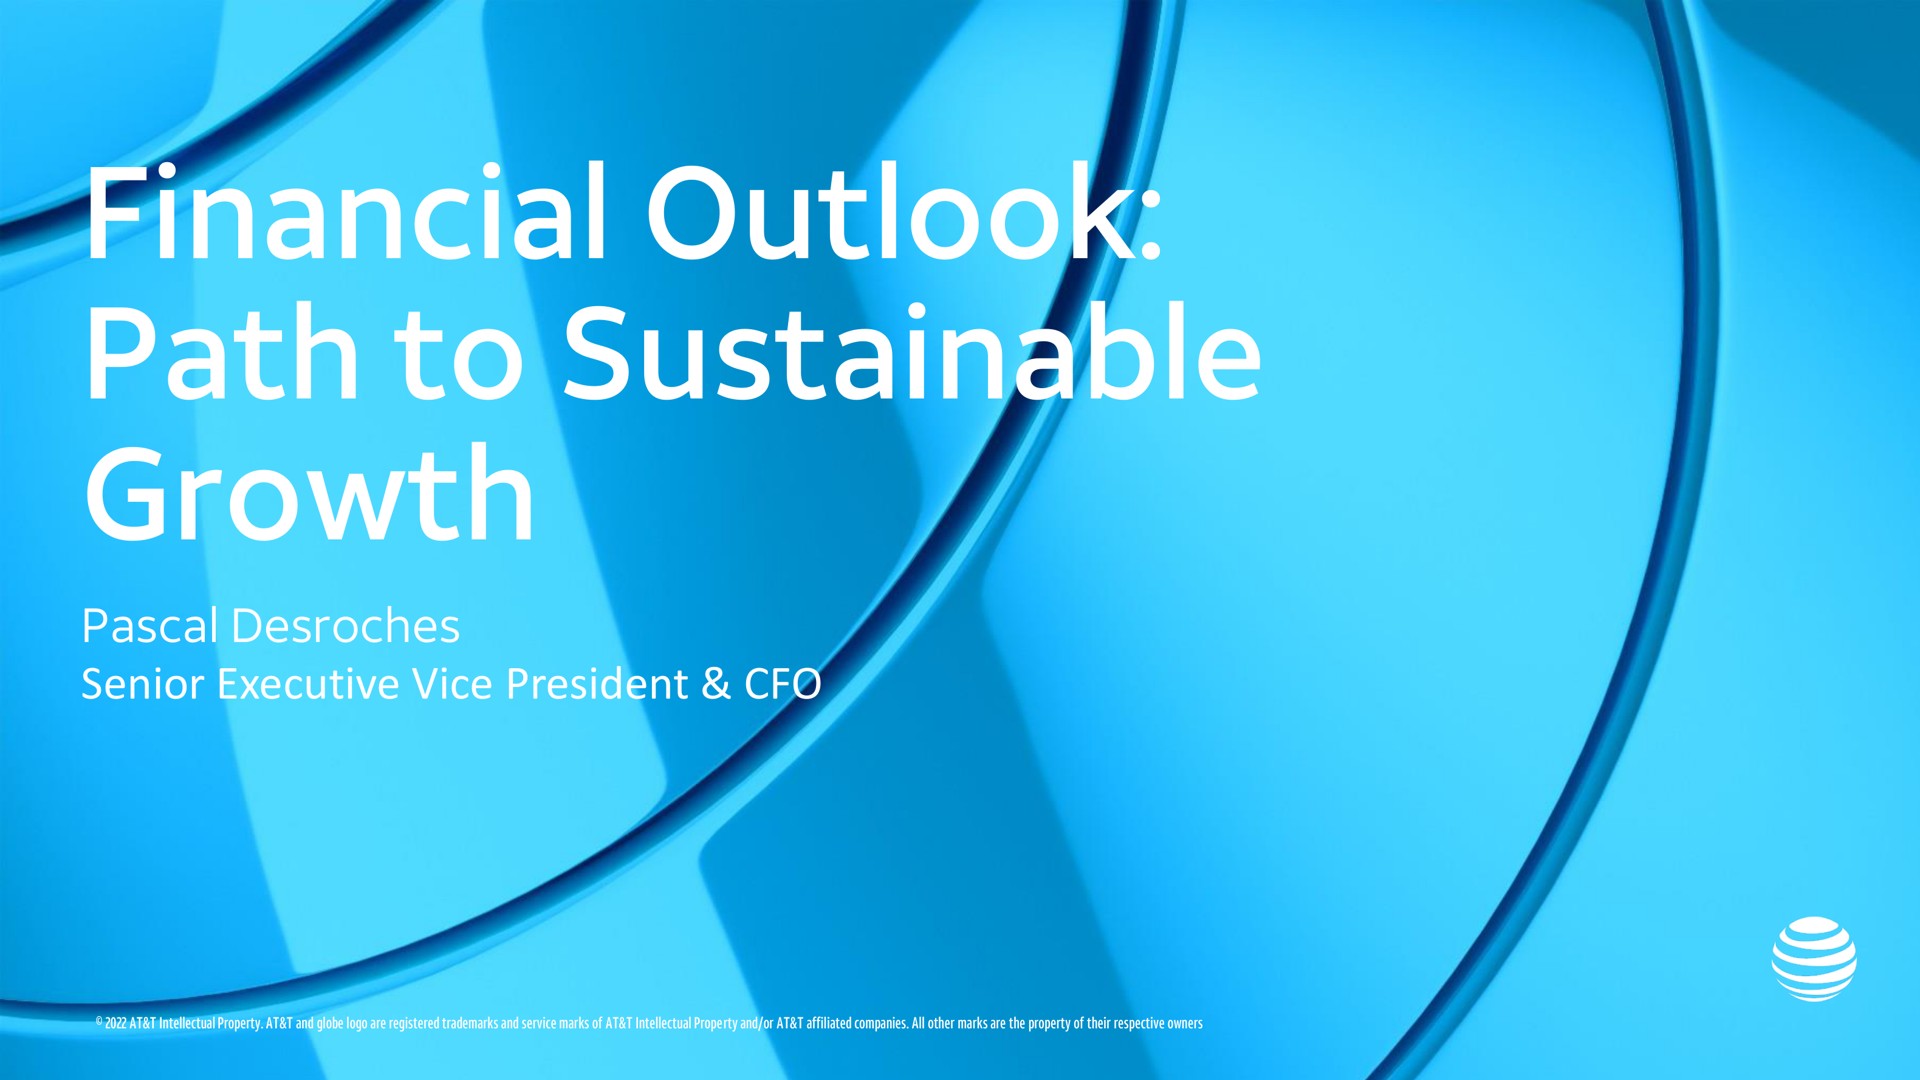 financial outlook path to sustainable growth | AT&T